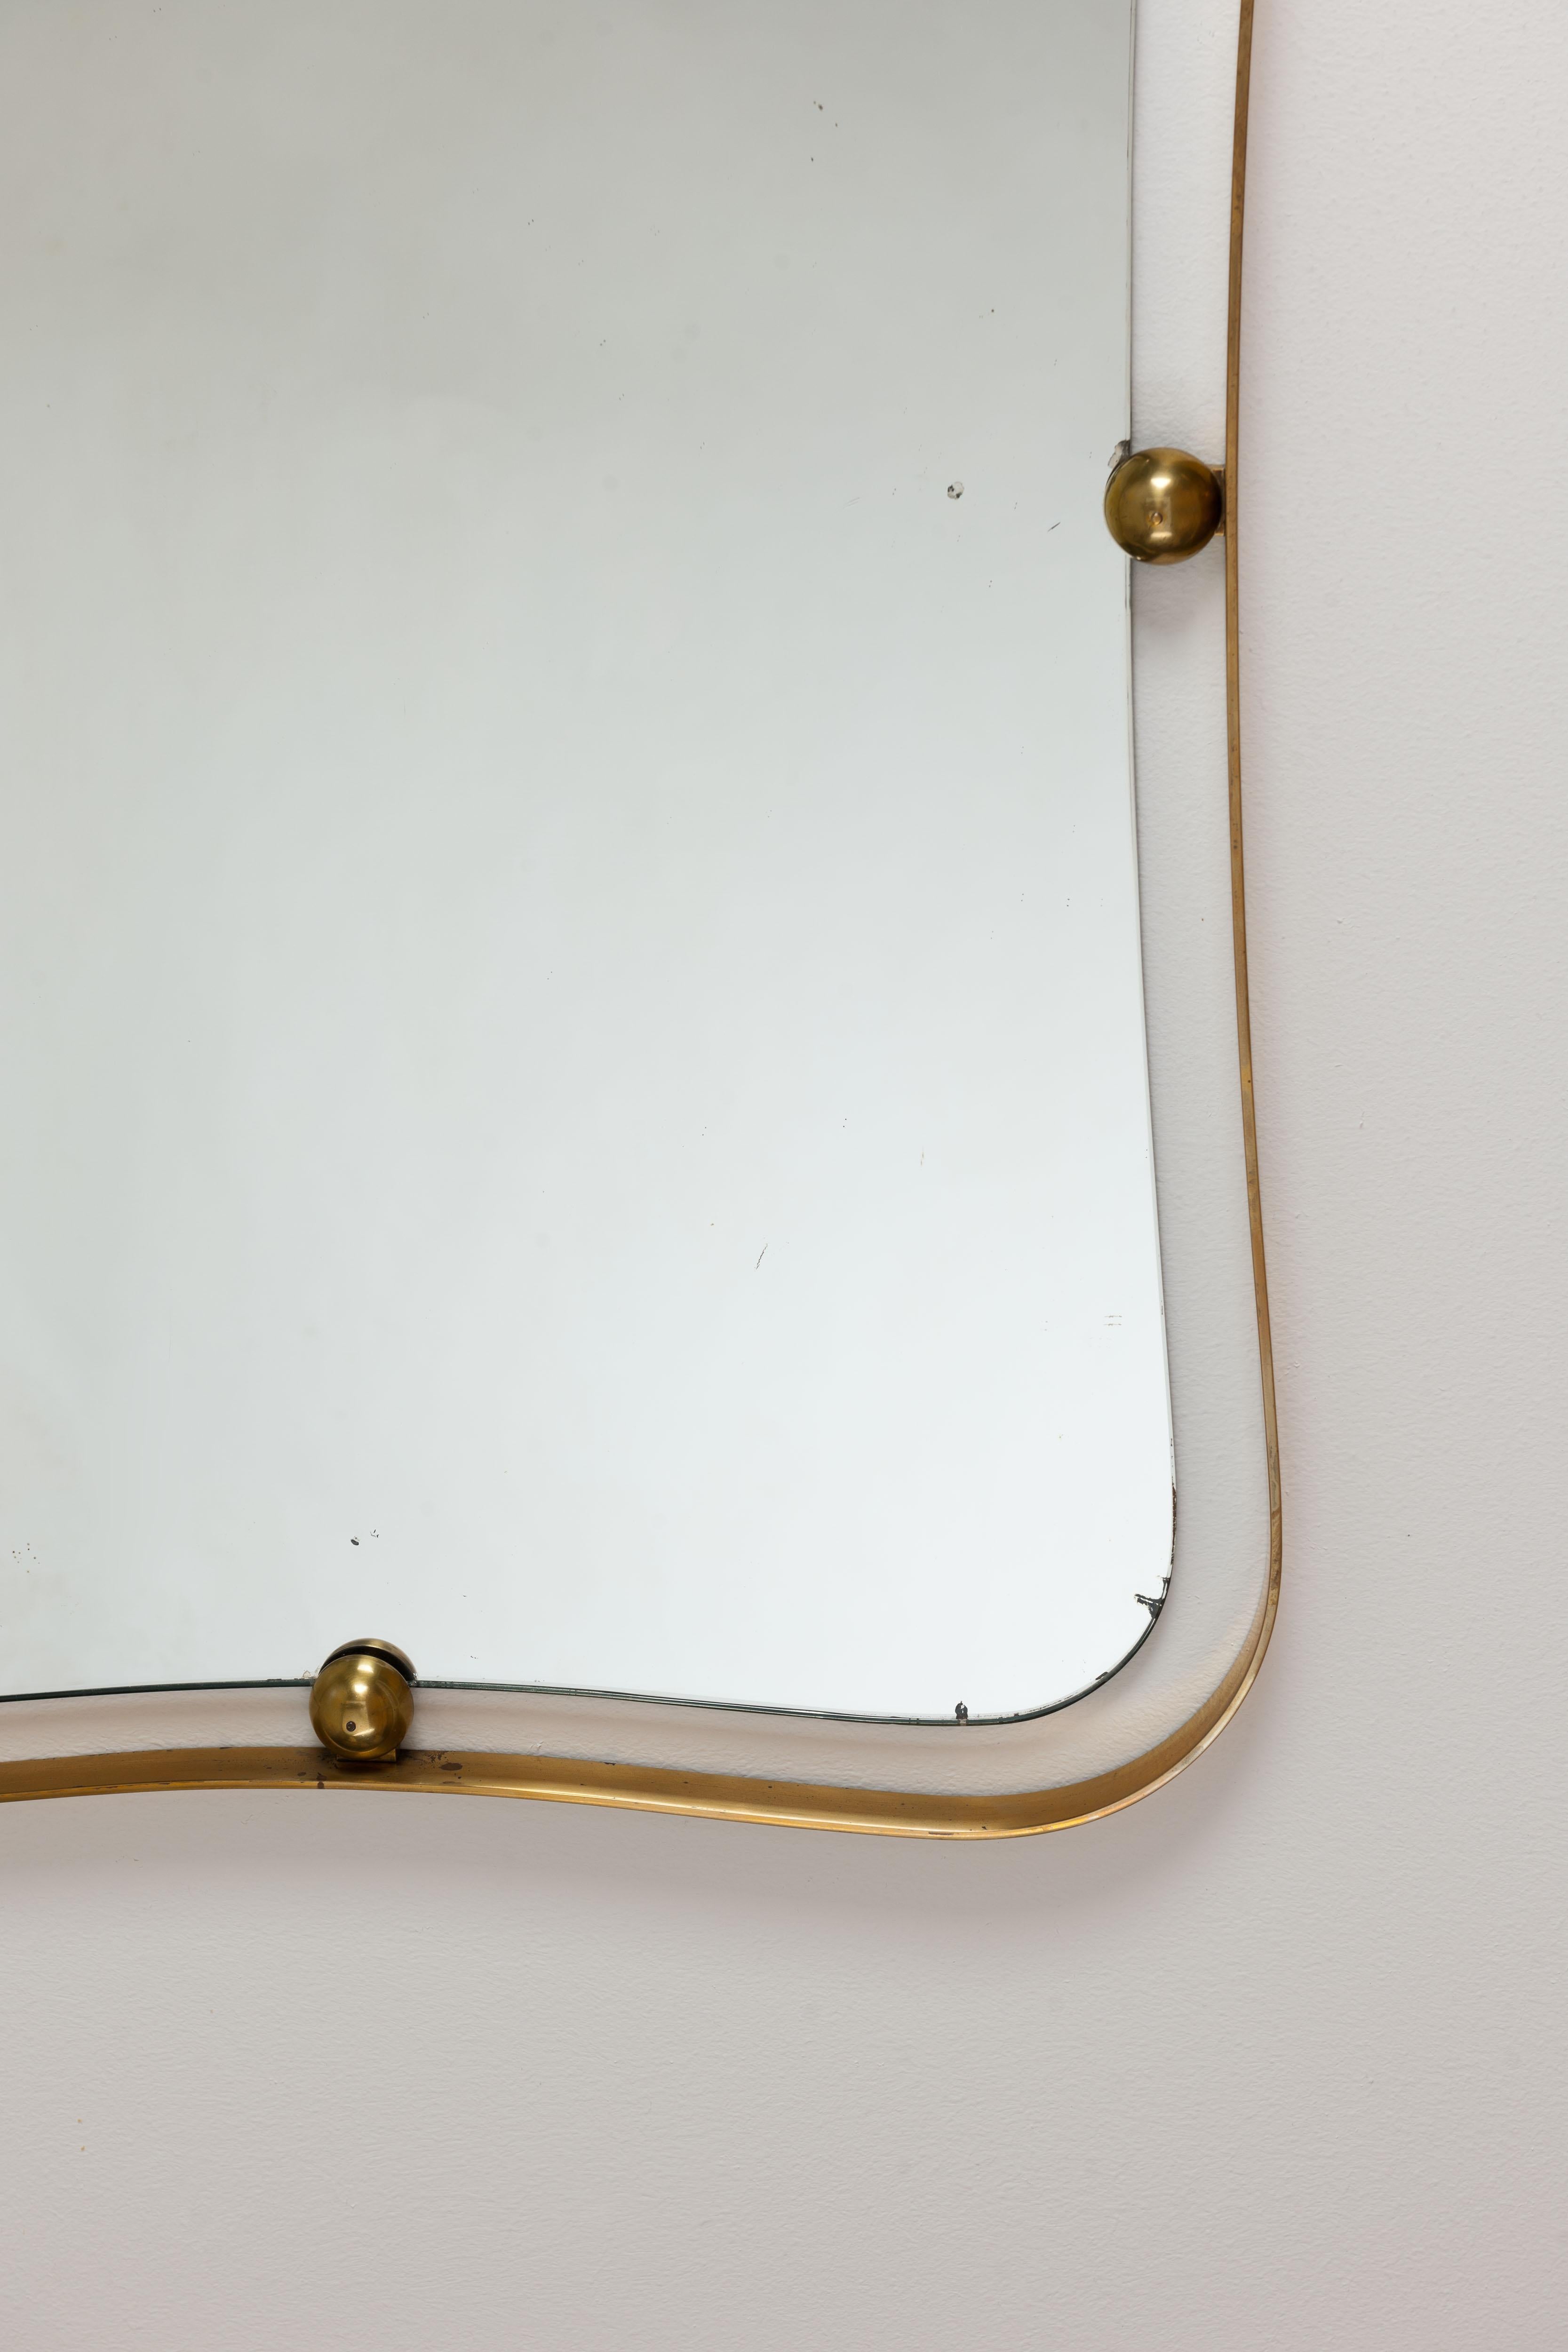 Beautiful large very high quality artisanal crafted brass Italian mirror from the mid-1960s. Executed from very heavy quality brass. Constructively very well designed.
The mirror is mounted blind on the wall, this way the mirror looks beautiful as